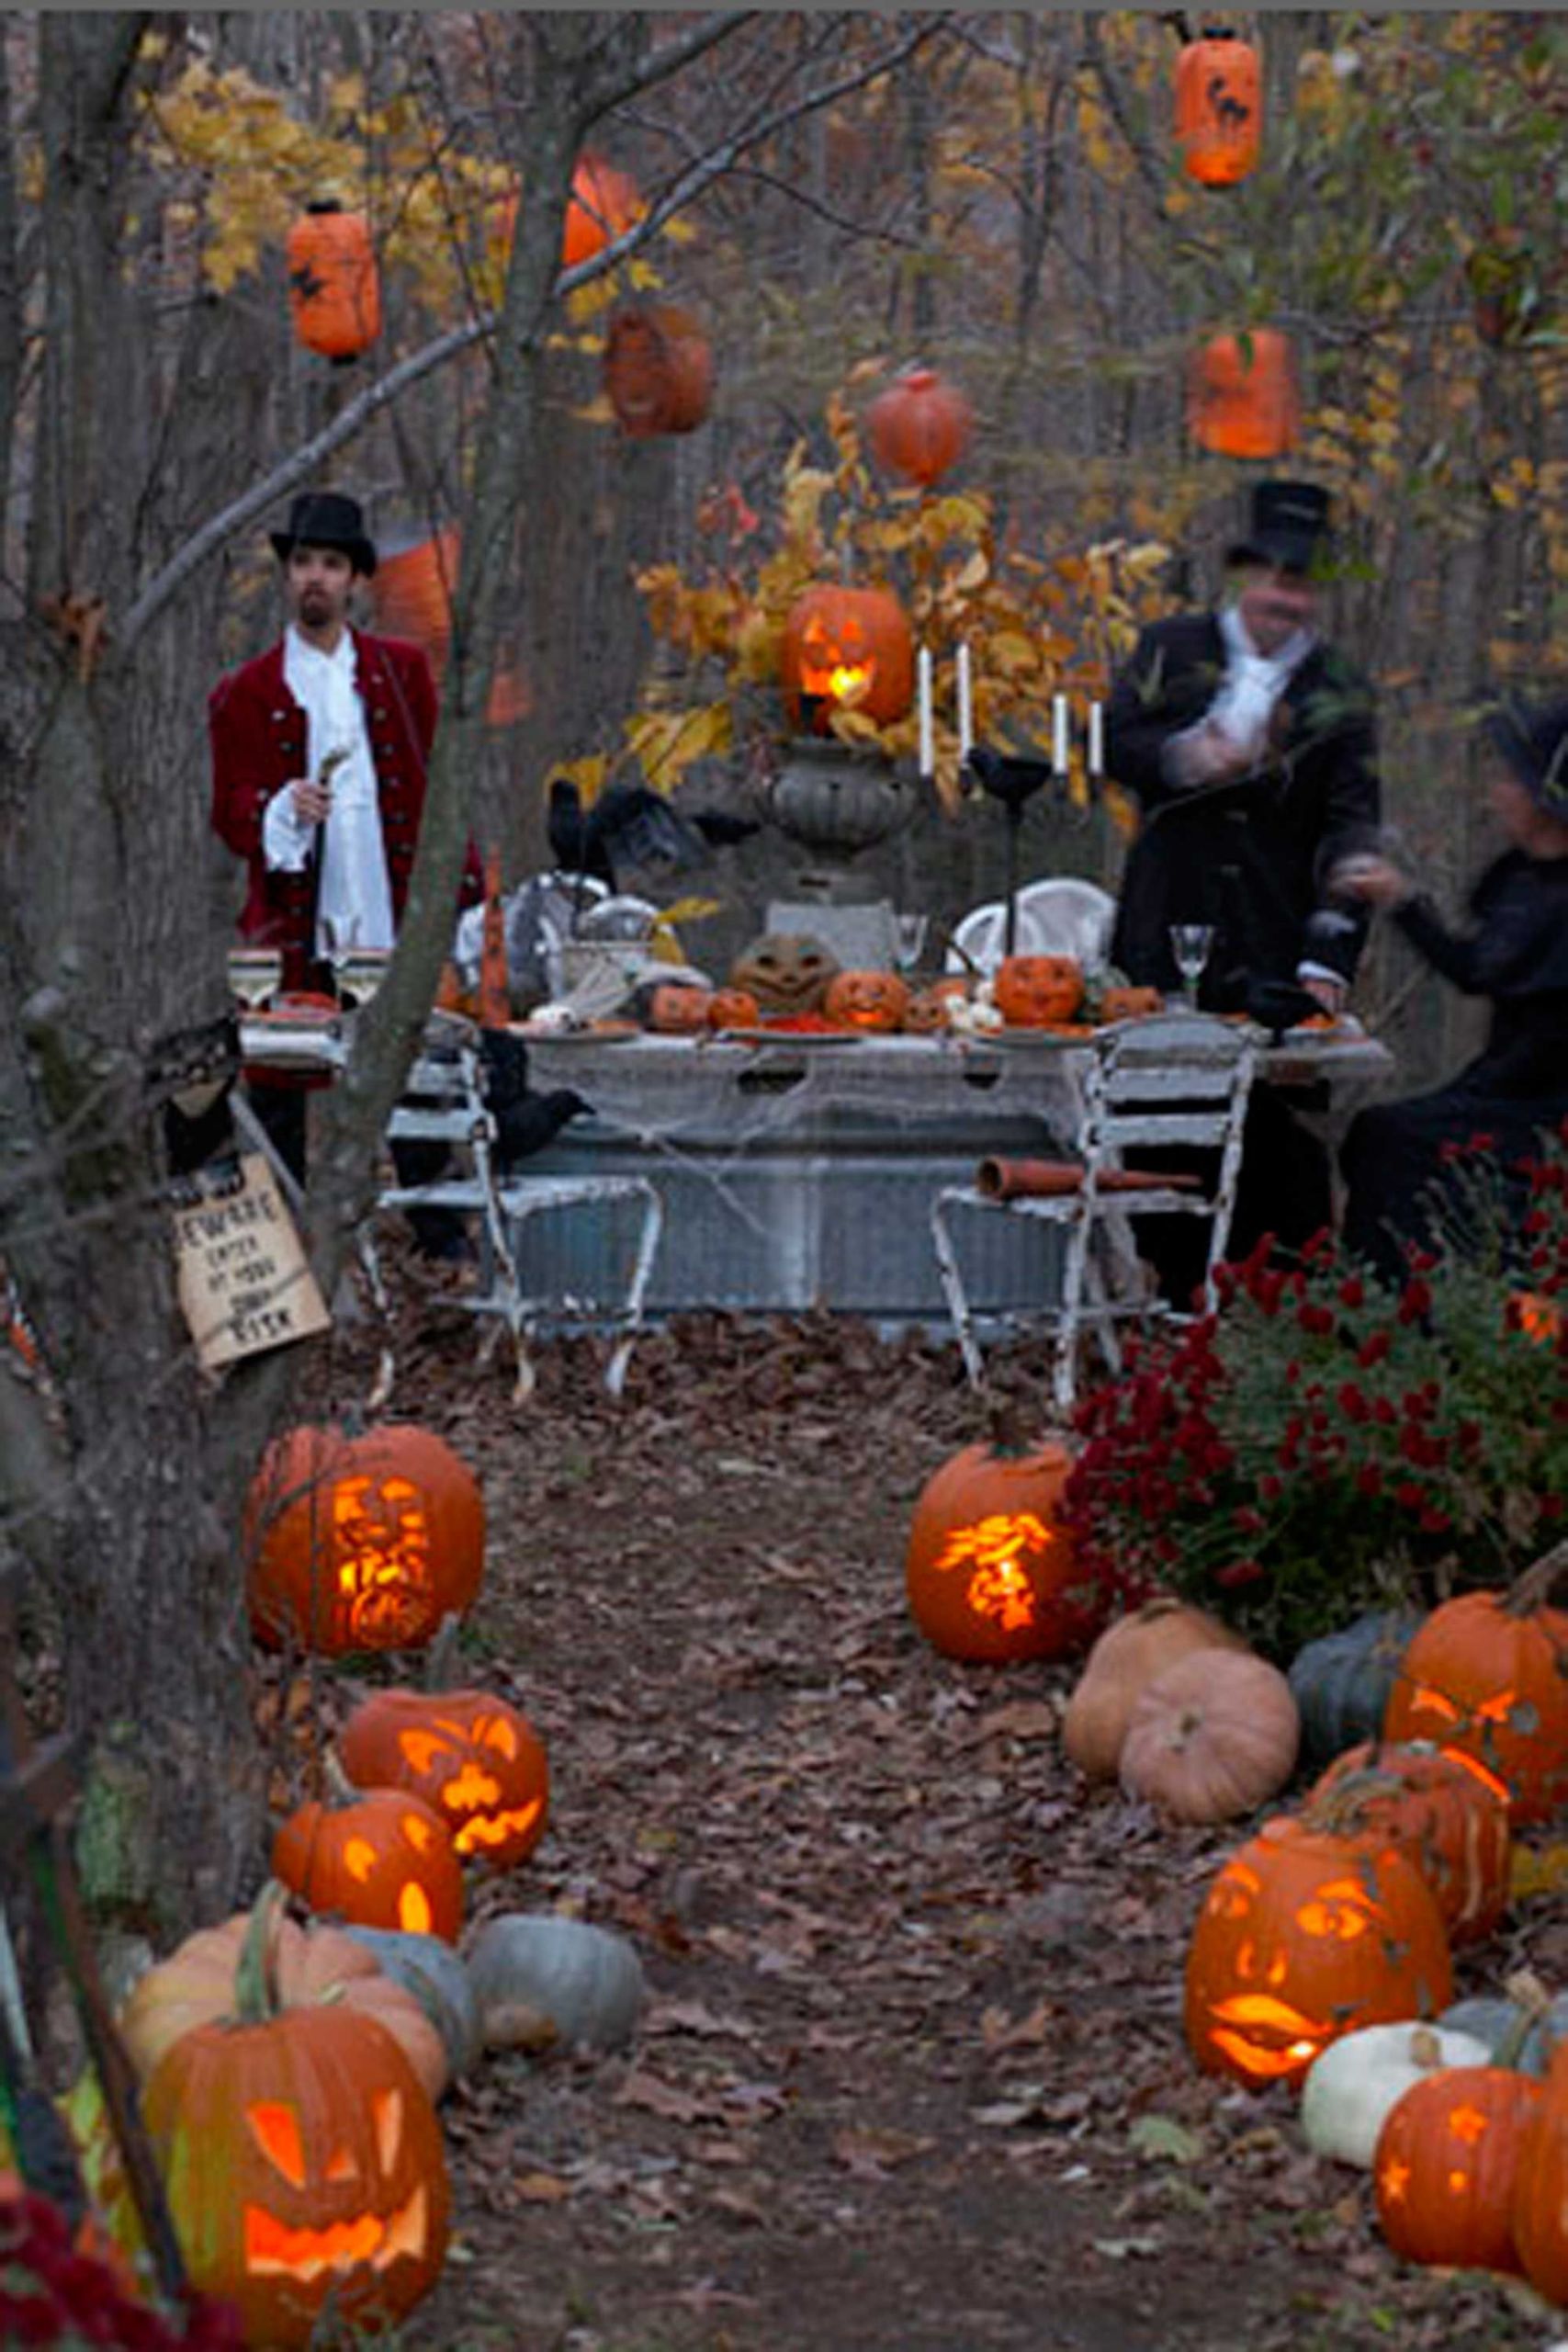 Classic Halloween Party Ideas
 Have a Scary Good Time at Your Halloween Party With These